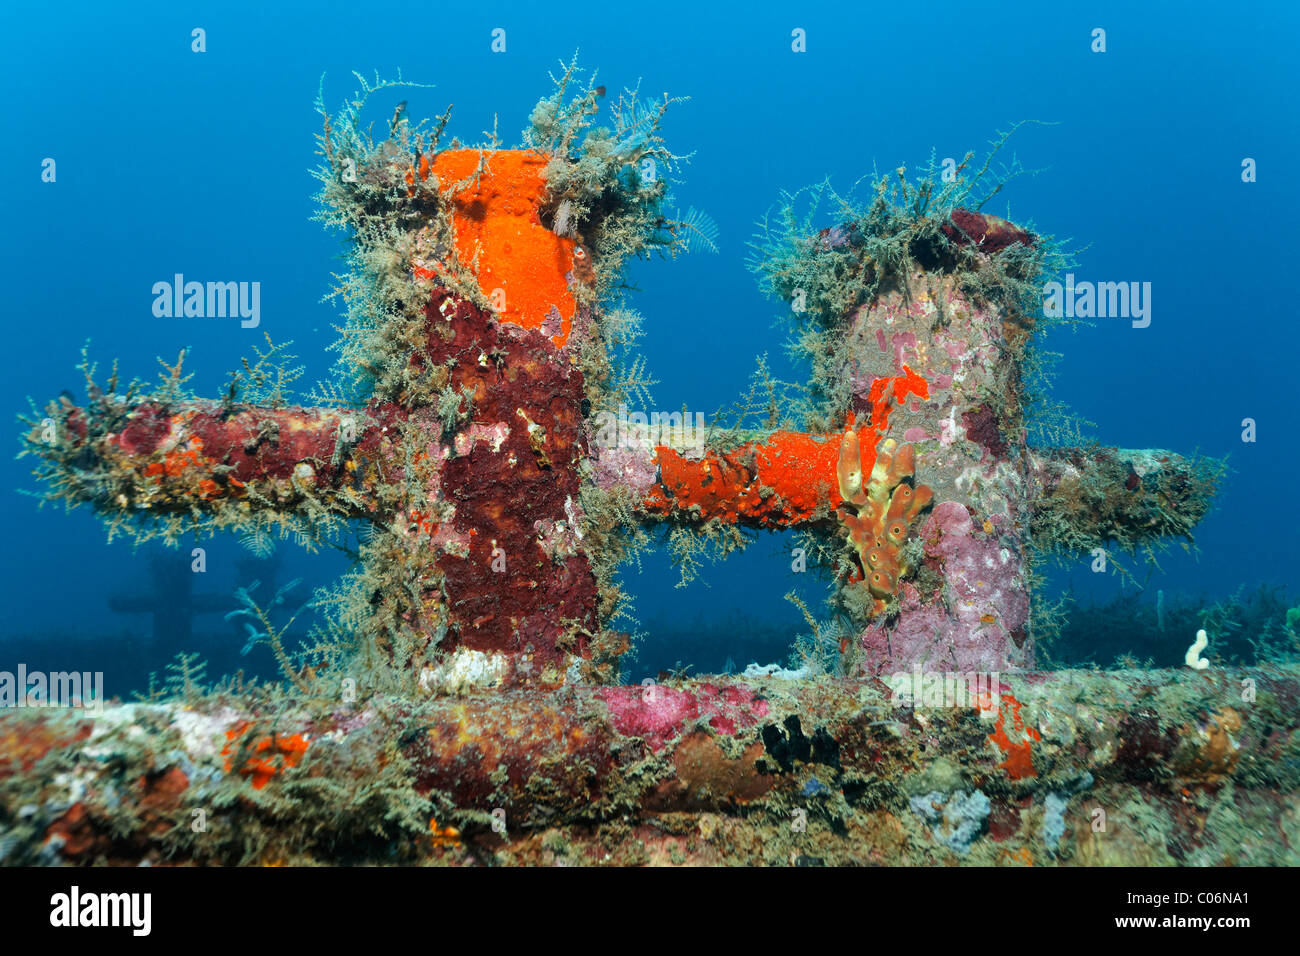 Bitt on deck of a shipwreck, overgrown with sponges, Little Tobago, Speyside, Trinidad and Tobago, Lesser Antilles Stock Photo